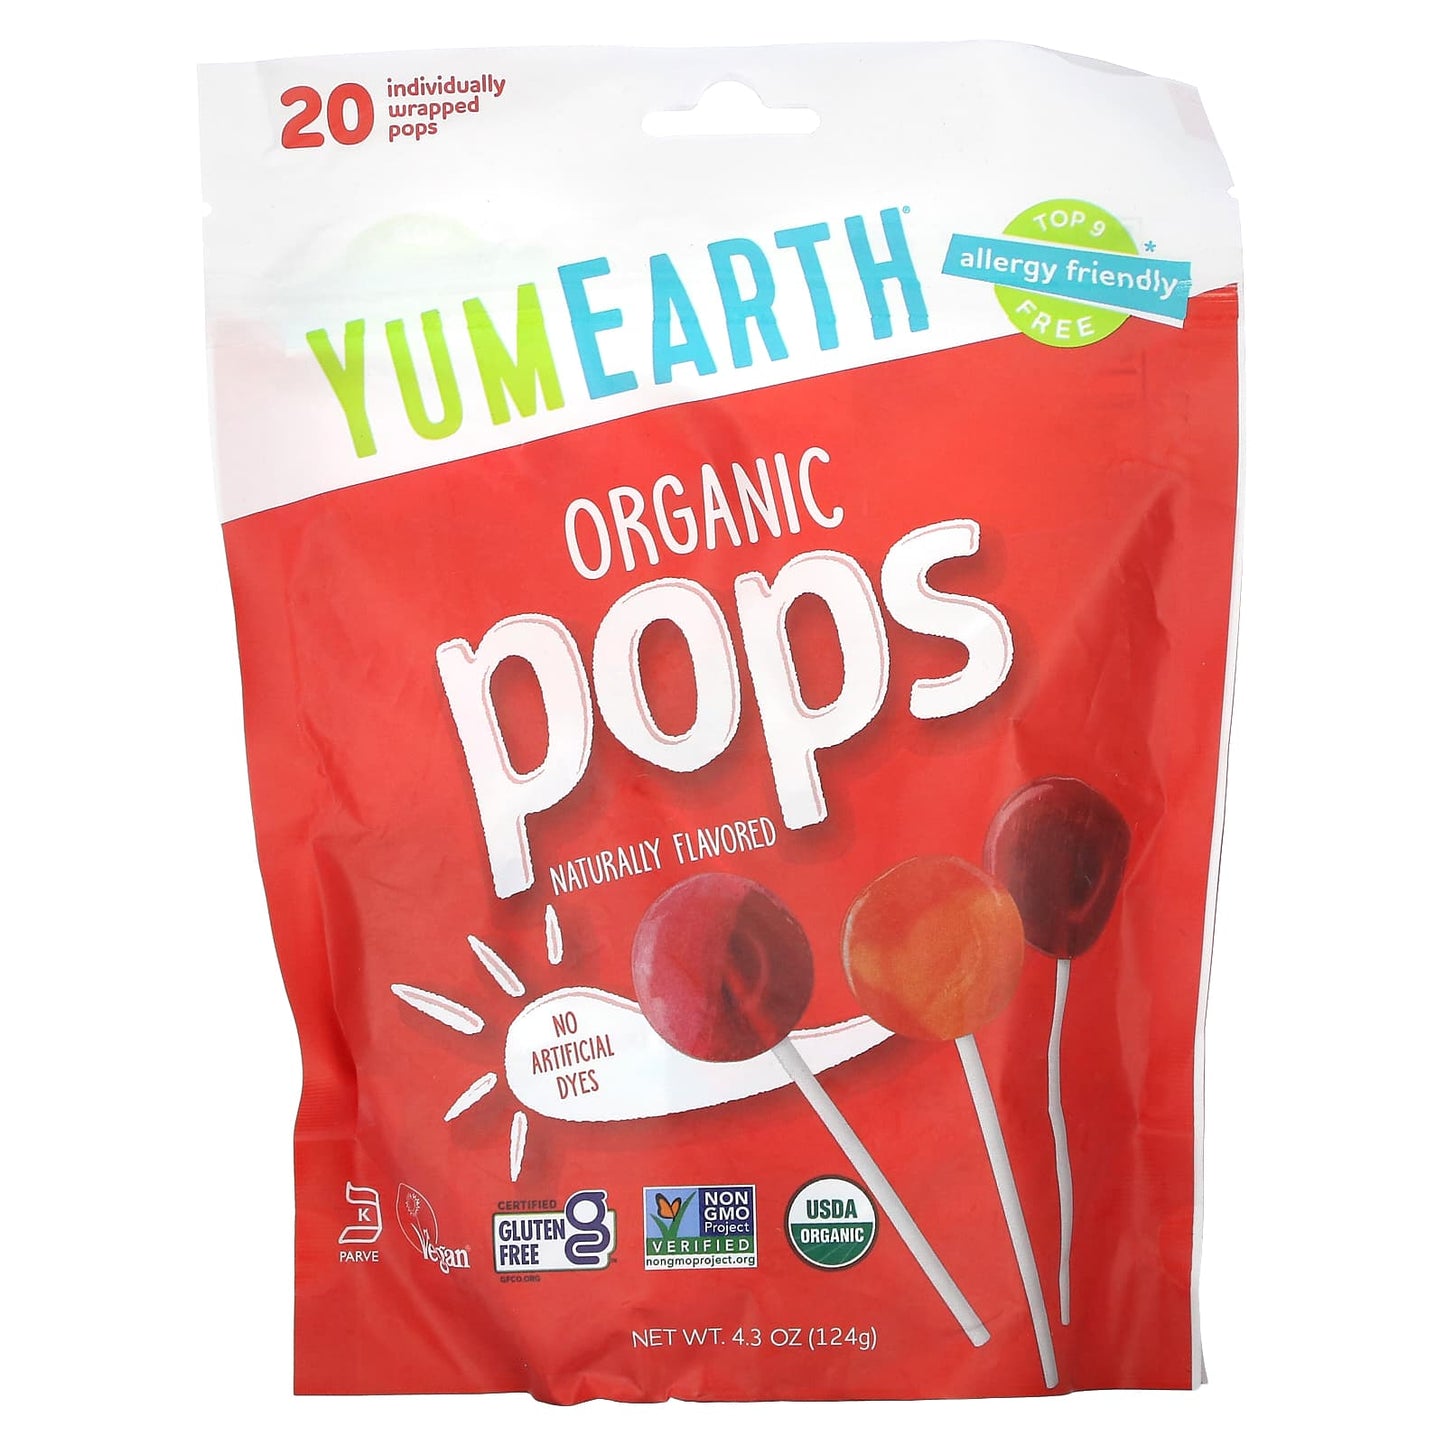 YumEarth-Organic Pops-Assorted Flavors-20 Pops-4.3 oz (124 g)